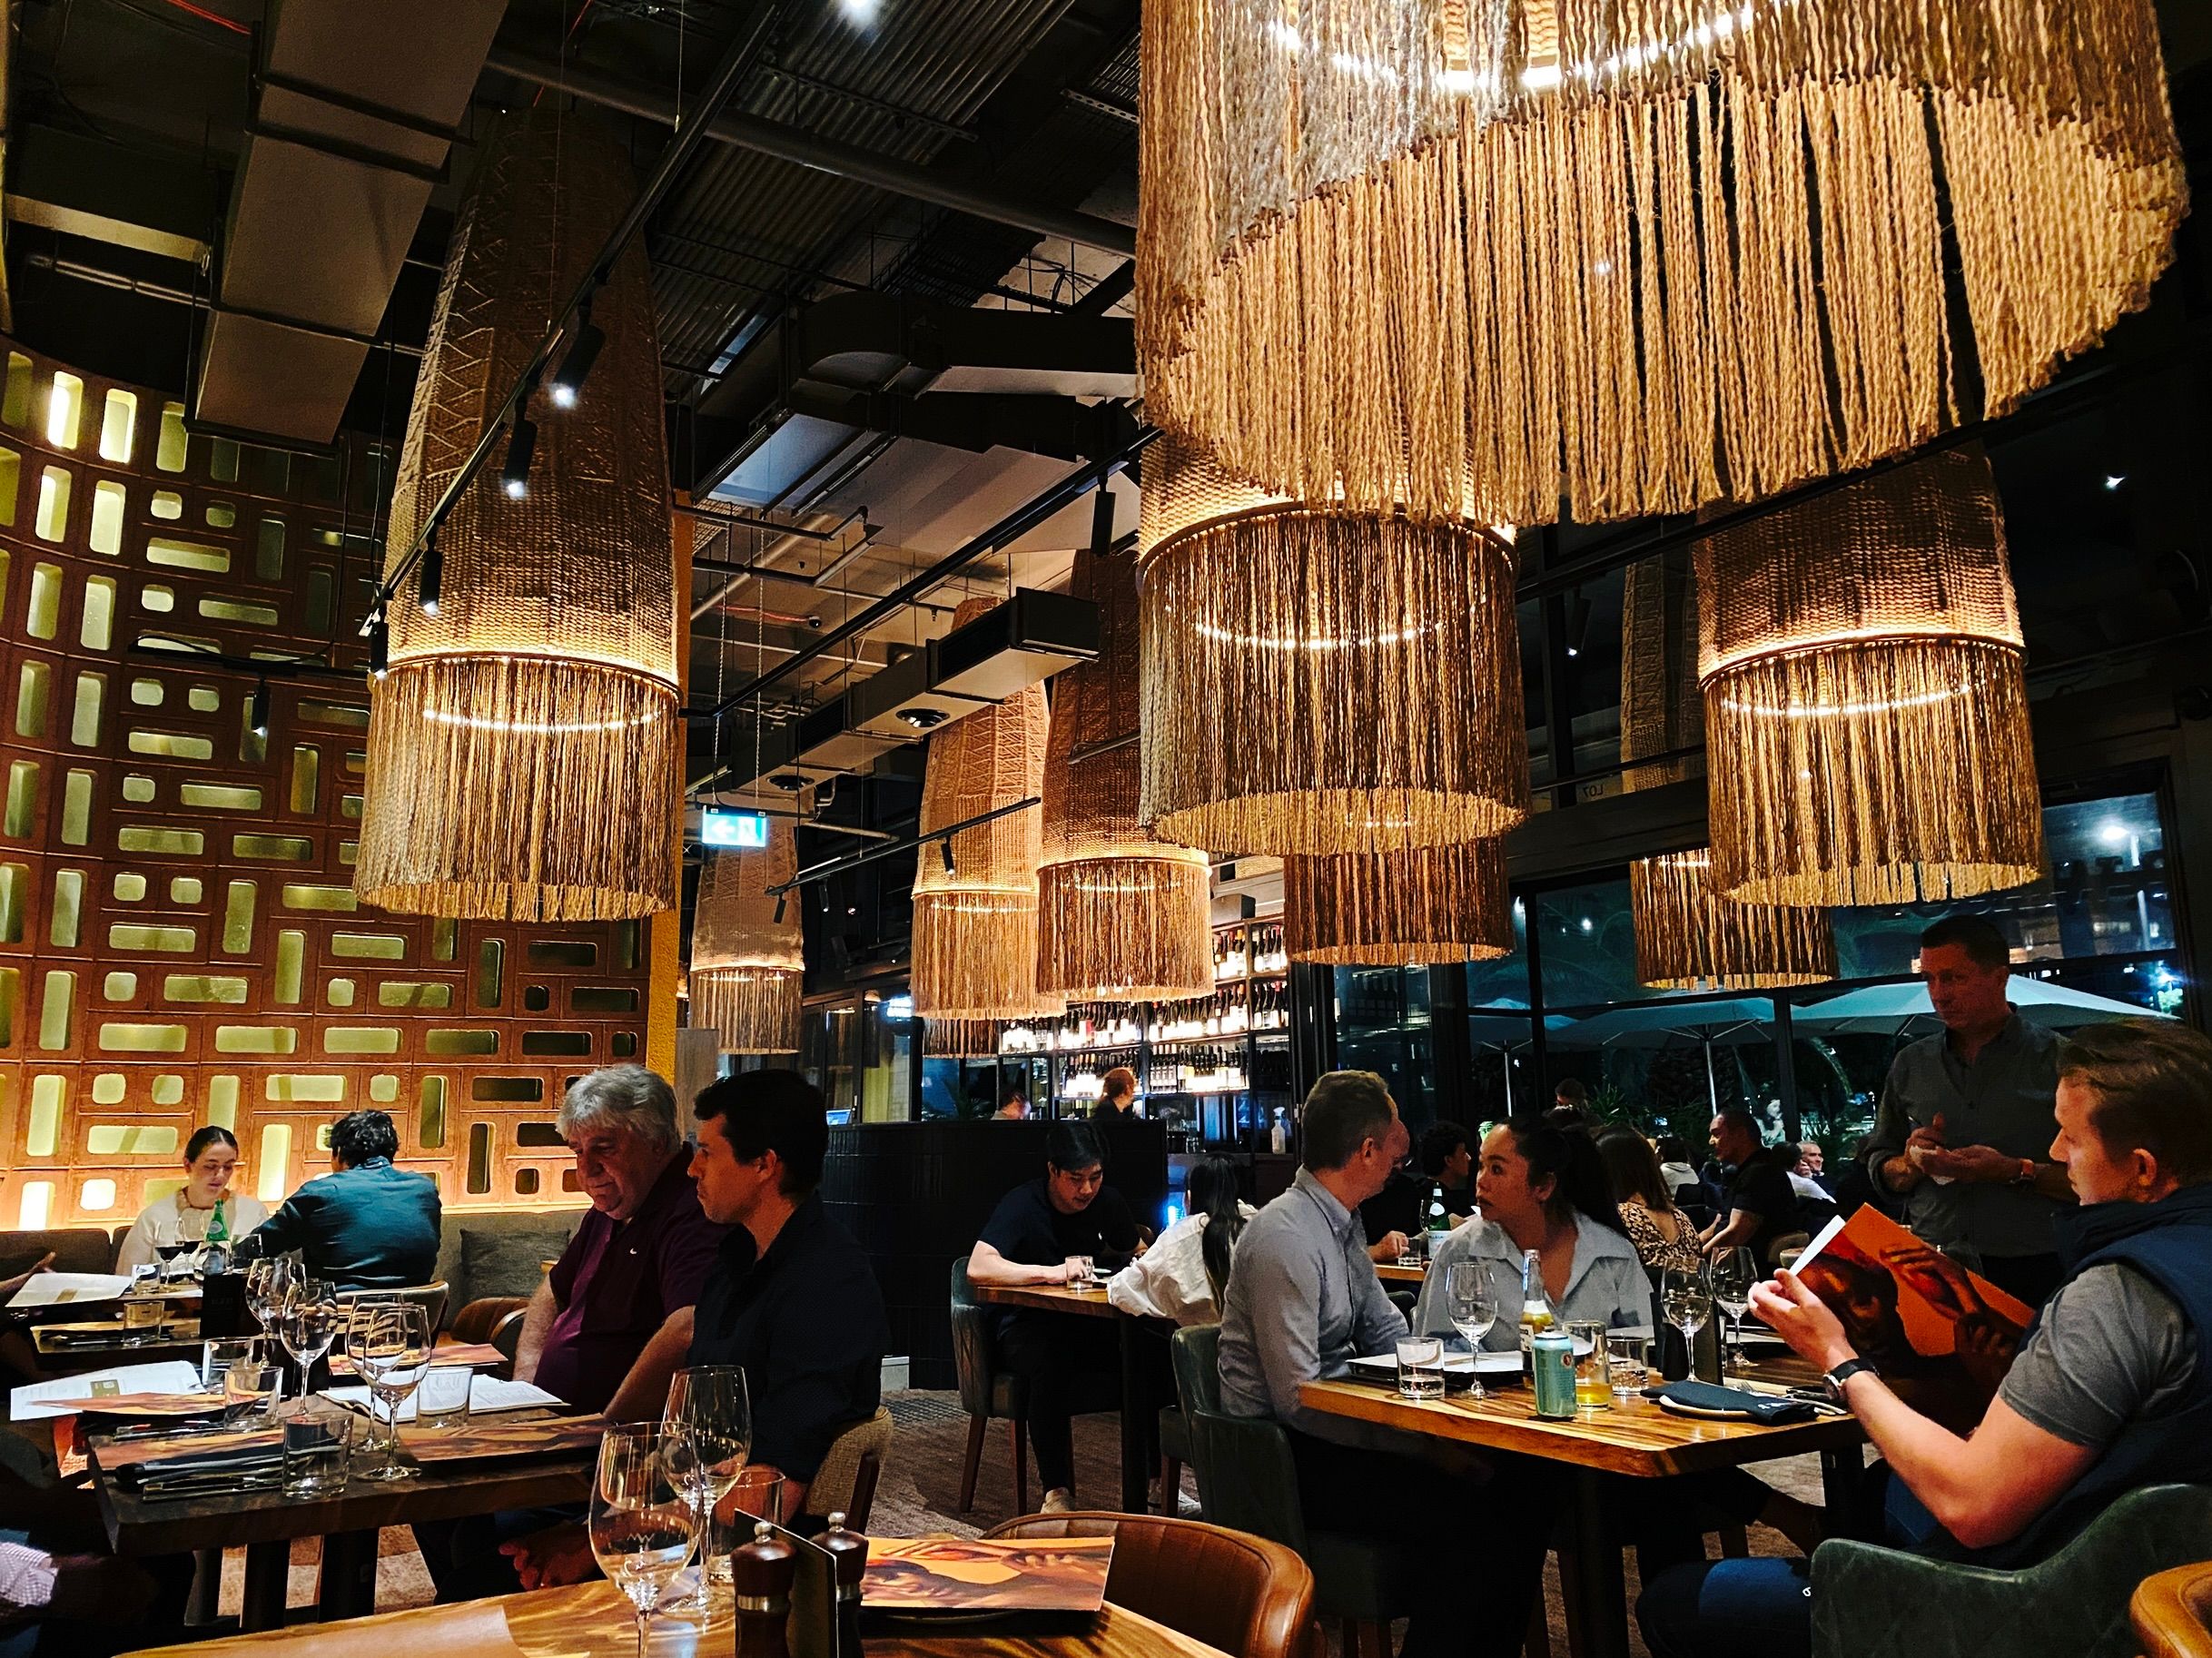 A photo of inside a restaurant with people sitting at ables. The light levels are fairly low, and there's BIG wicker light fixtures hanging down from the ceiling with tassels hanging from the bottom of the wicker. The wall at the back-left is made from concrete blocks with holes in the middle, and behind THOSE is another wall that's been lit up.